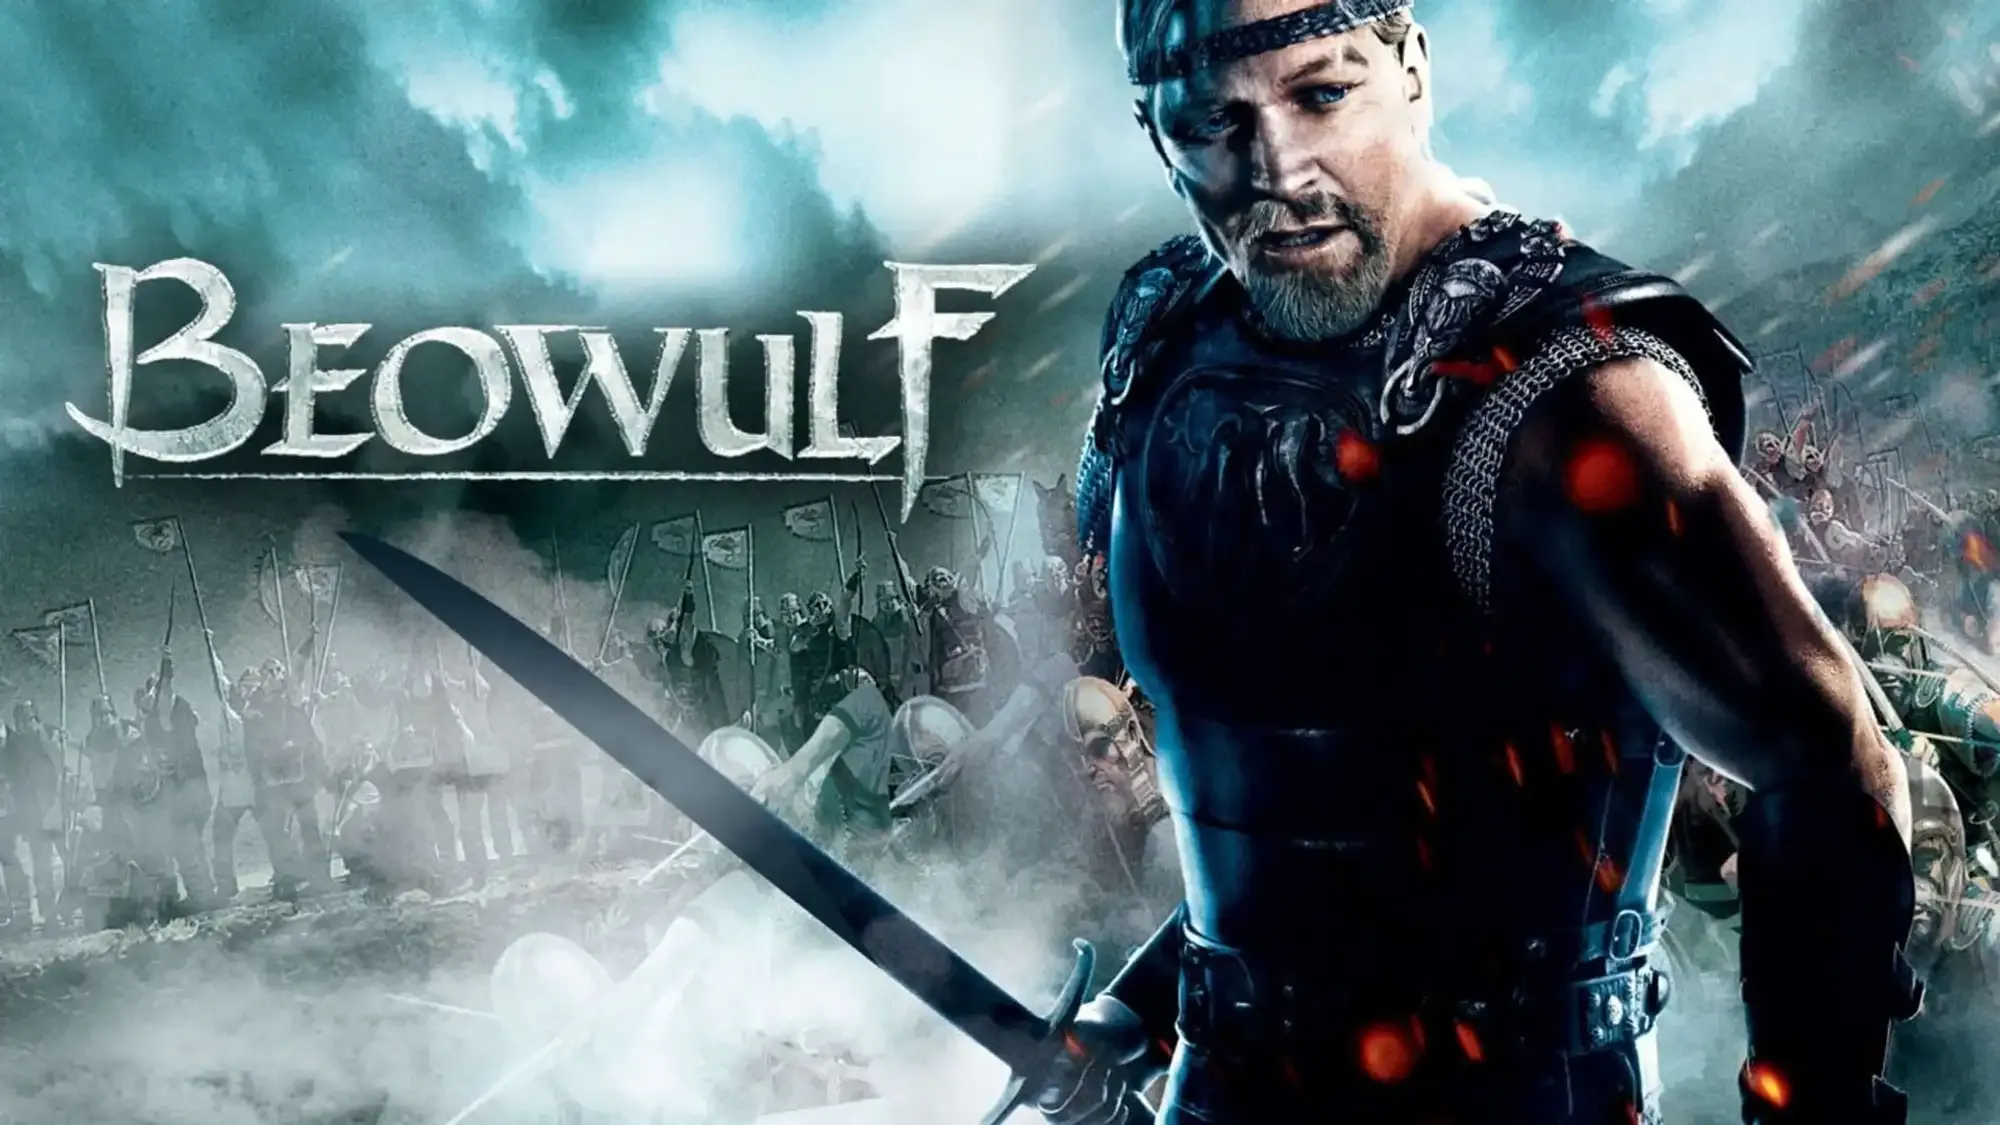 Beowulf movie review